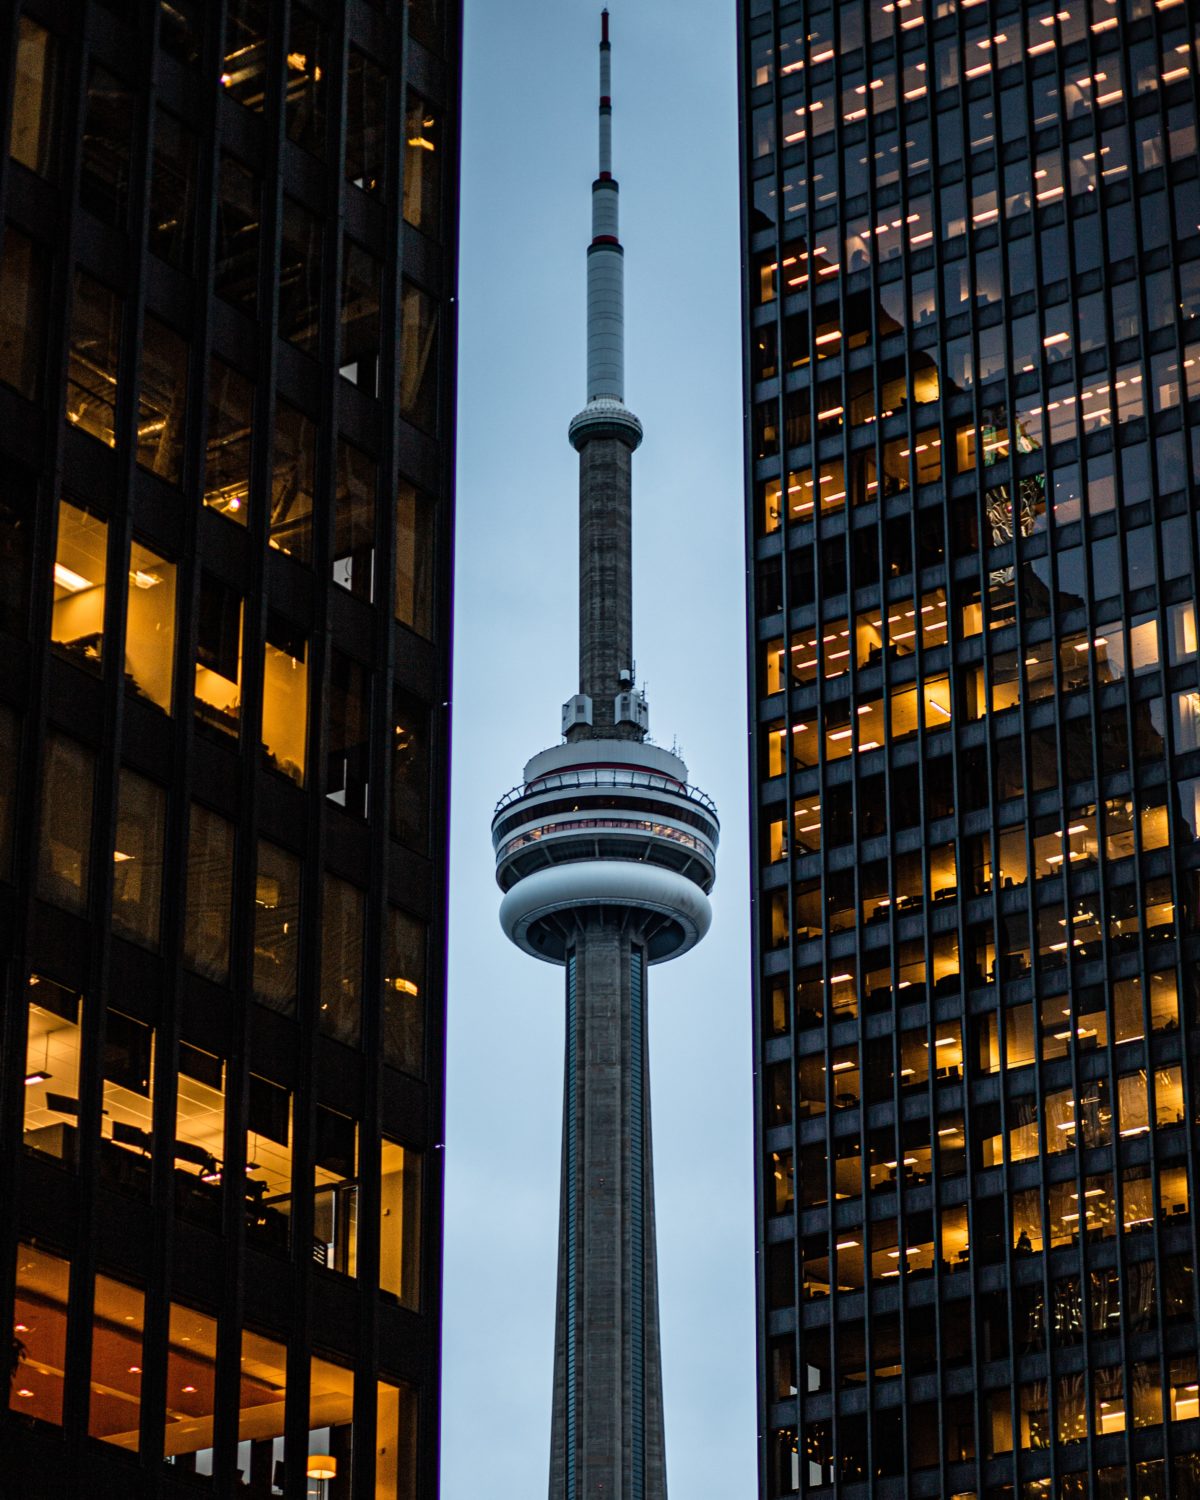 Toronto's CN Tower flanked by office towers on either side.